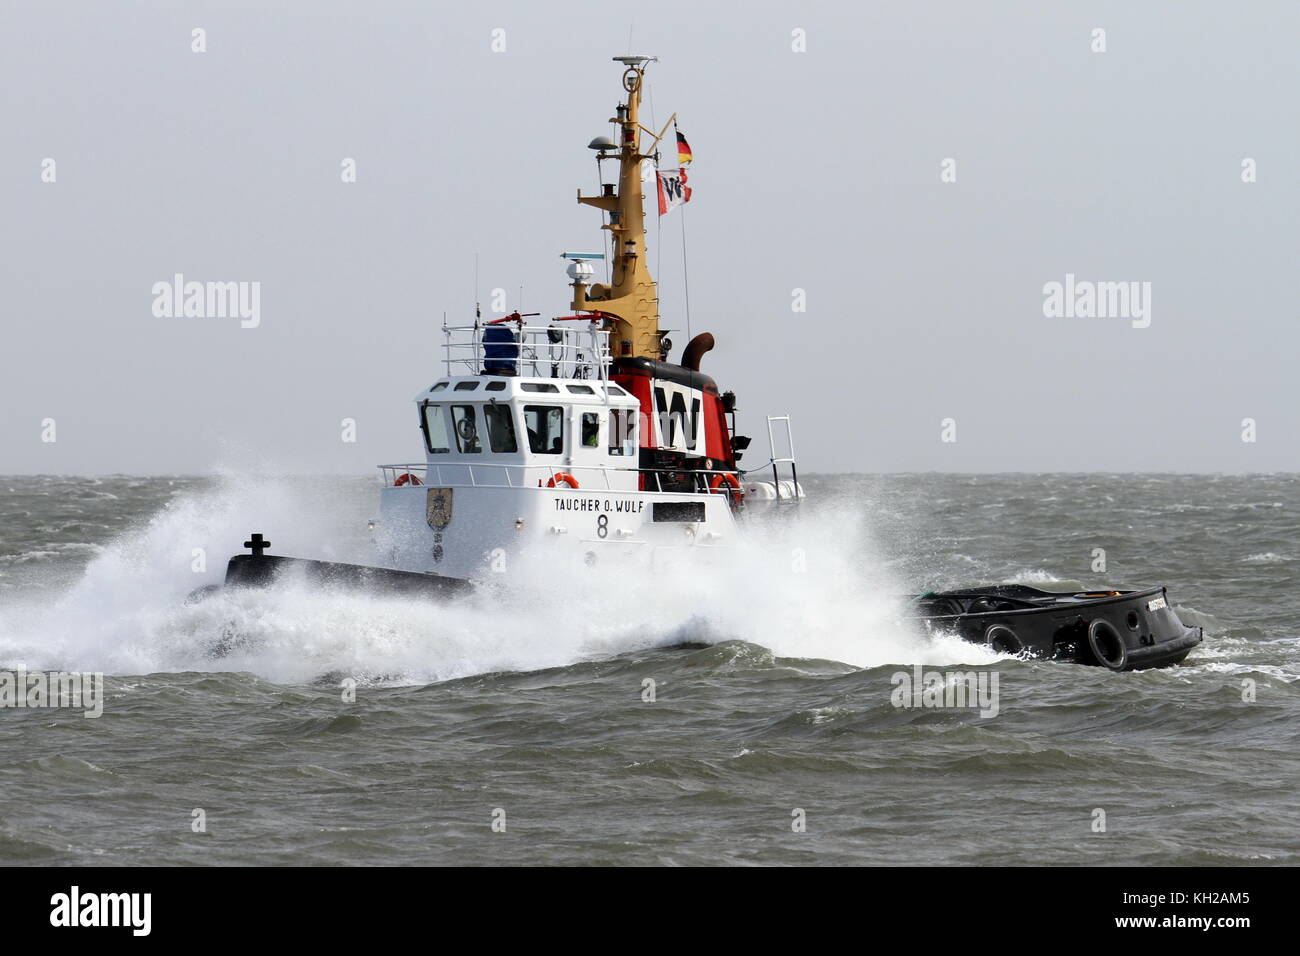 The harbor tug divers O Wulf 8 leaves the port of Cuxhaven on stormy sea on March 30, 2015. Stock Photo